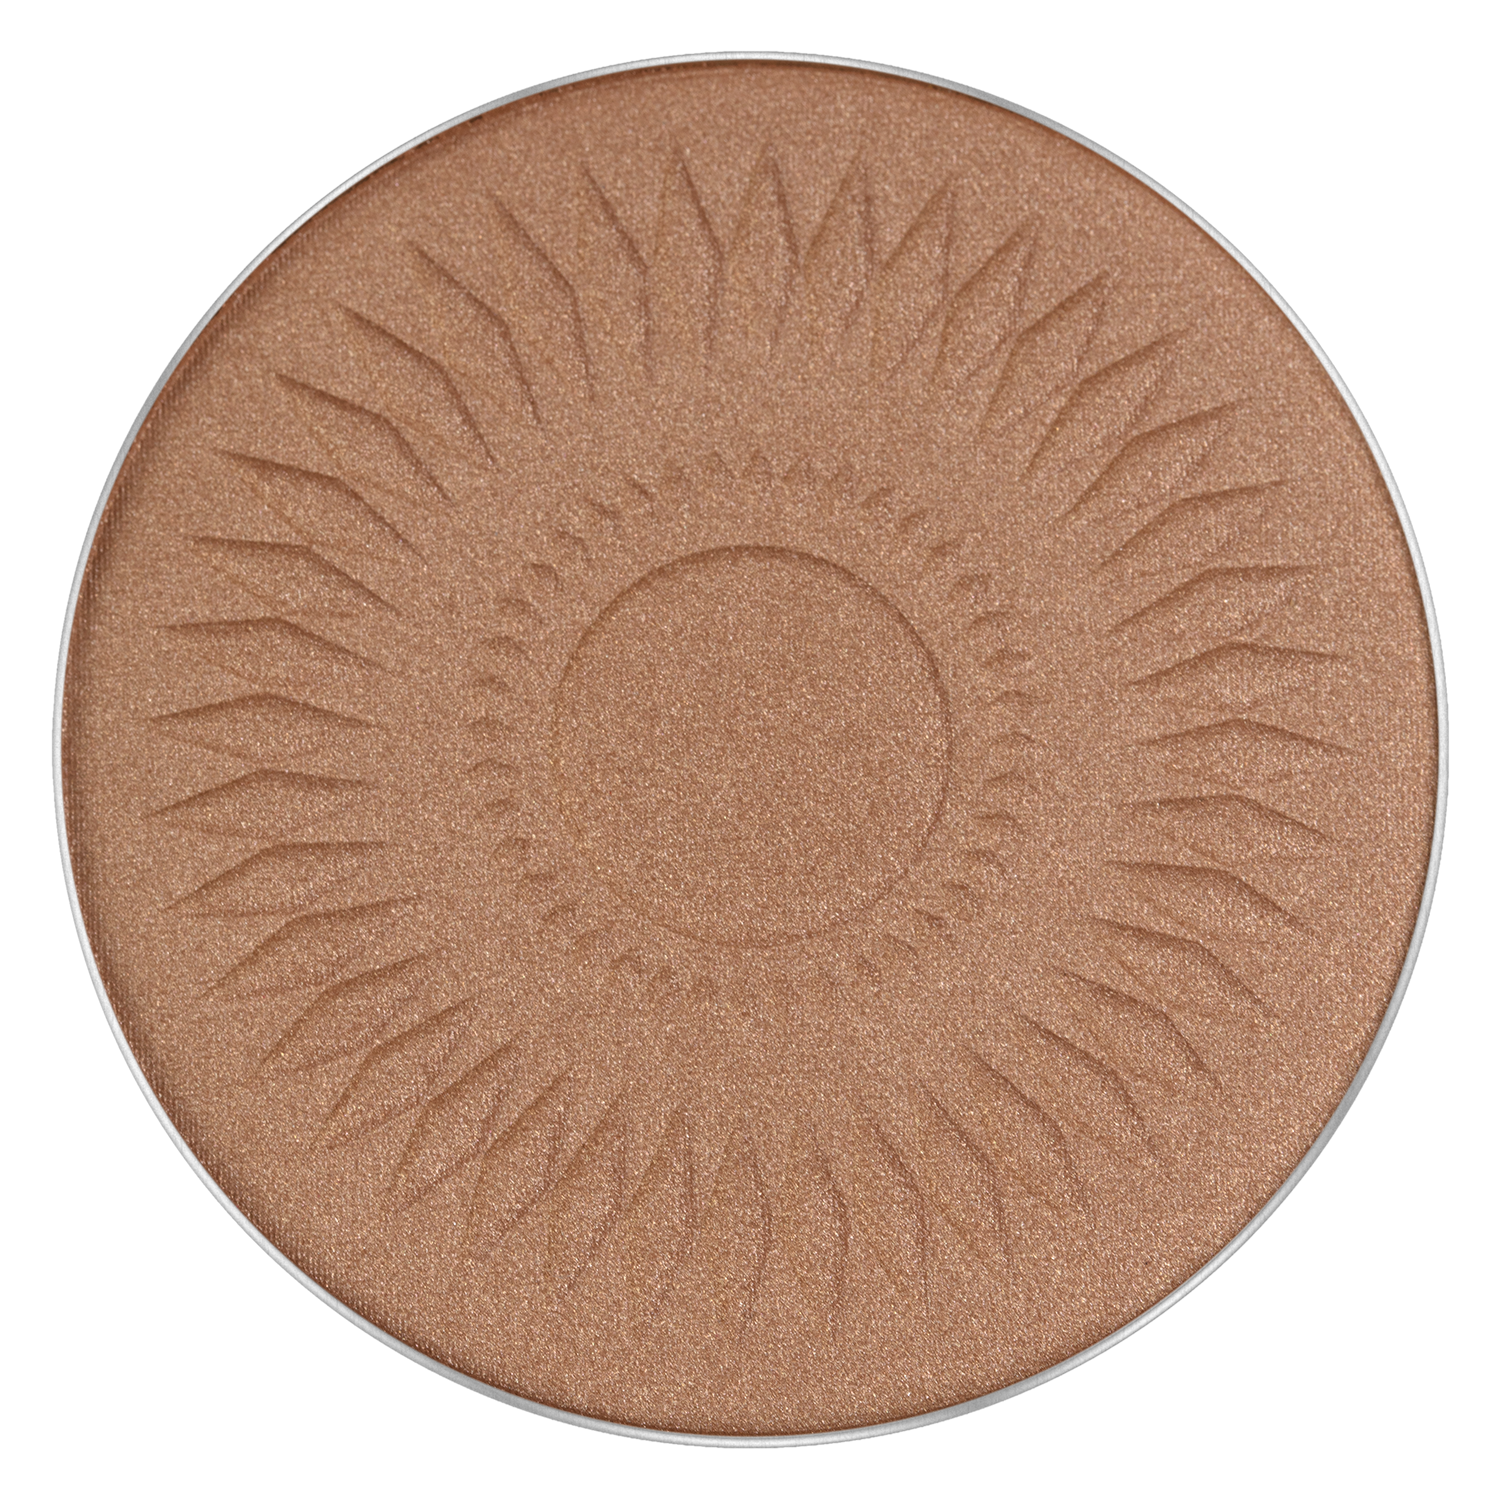 FREEDOM SYSTEM ALWAYS THE SUN GLOW FACE BRONZER